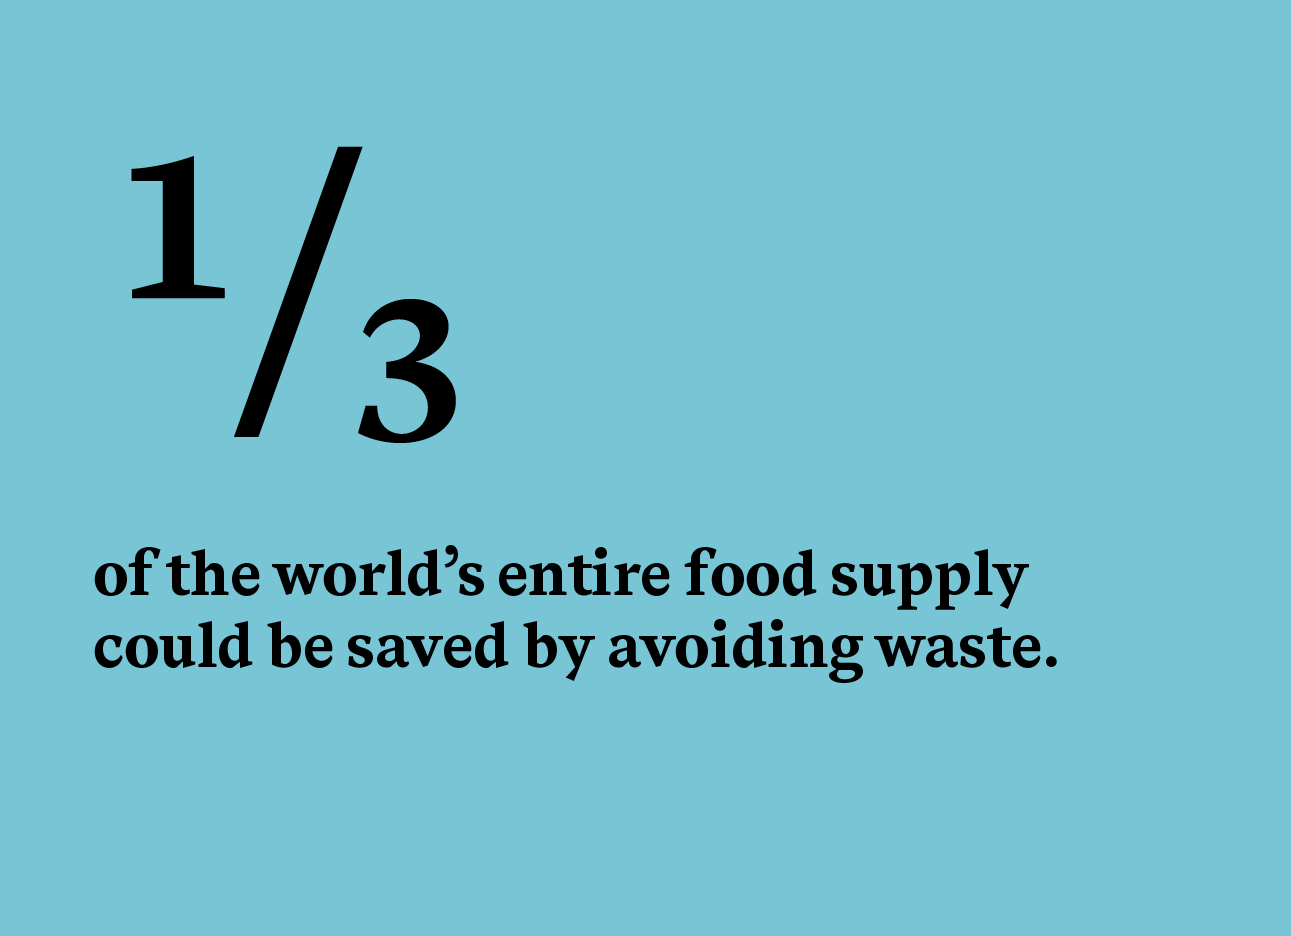 One third of the world's entire food supply could be saved by avoiding waste